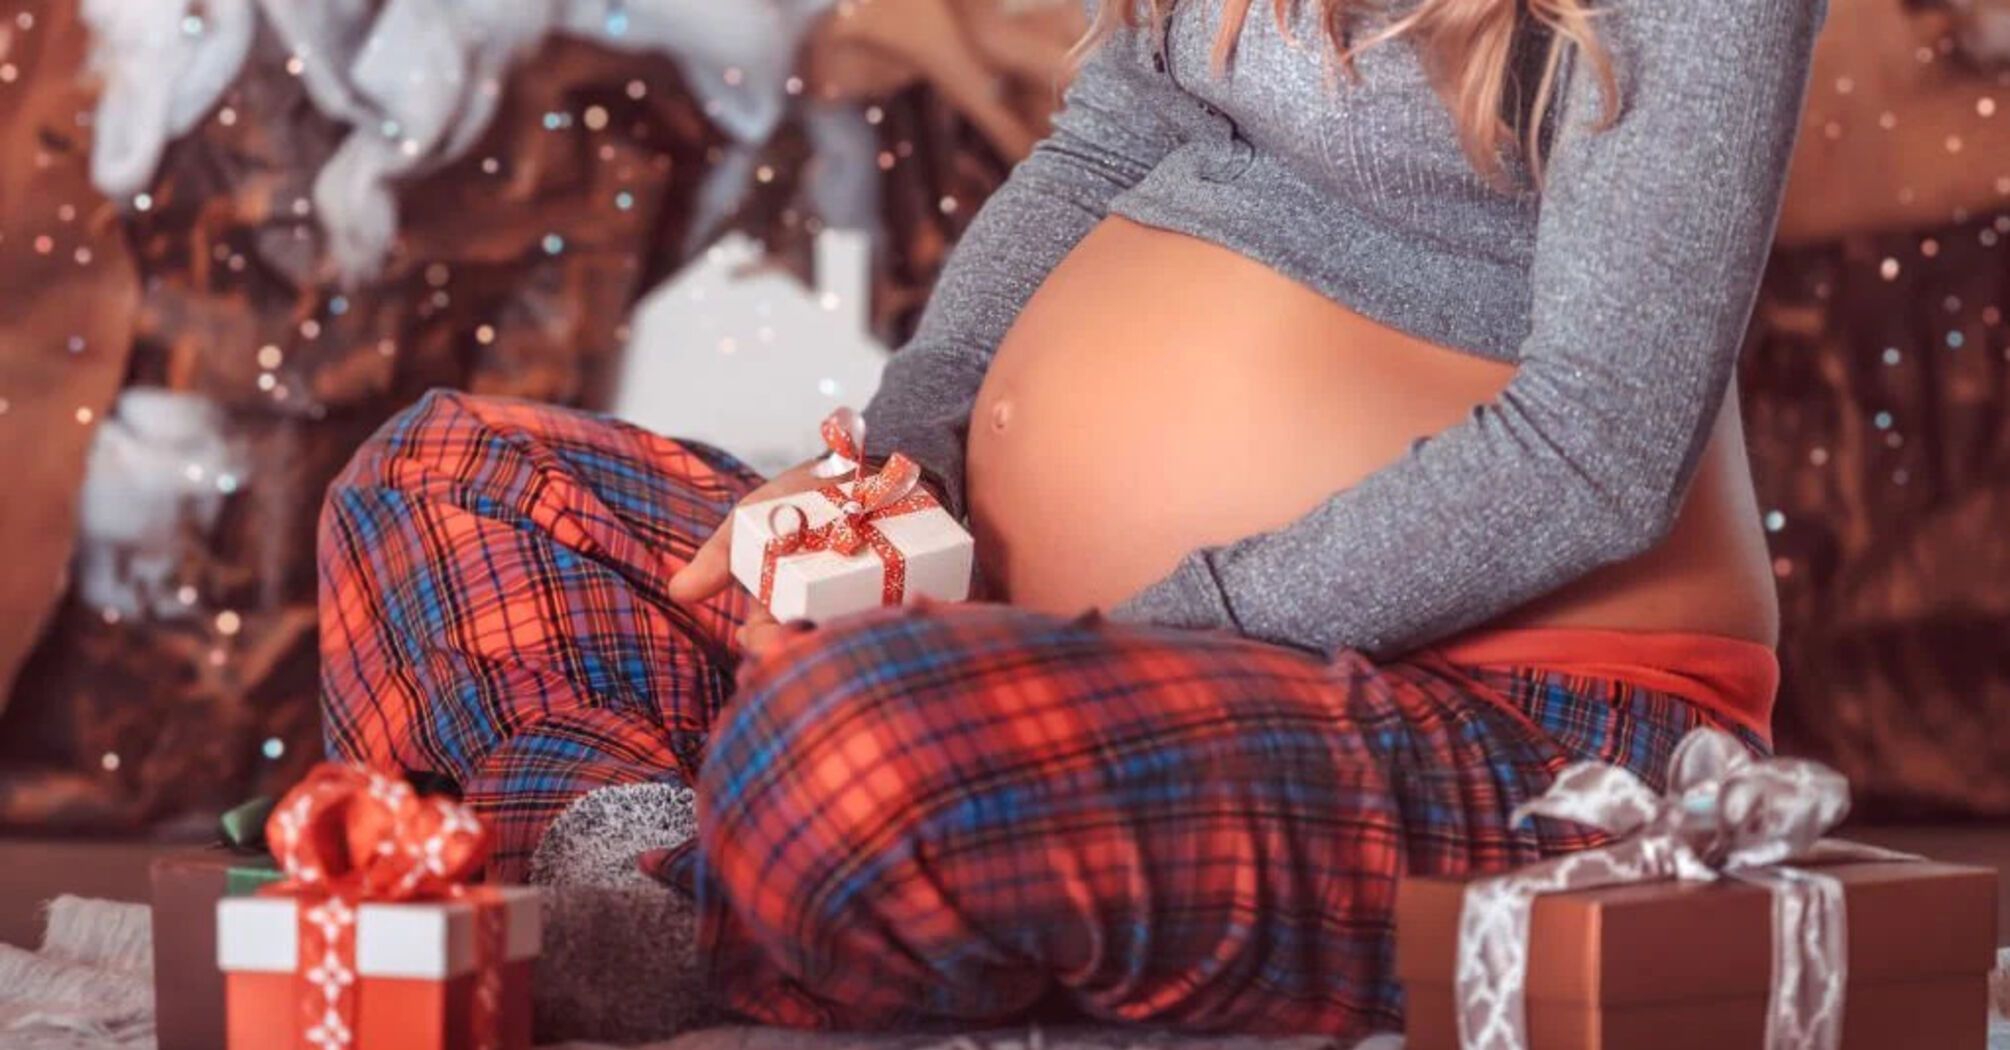 Why it is advisable not to take gifts for the unborn child